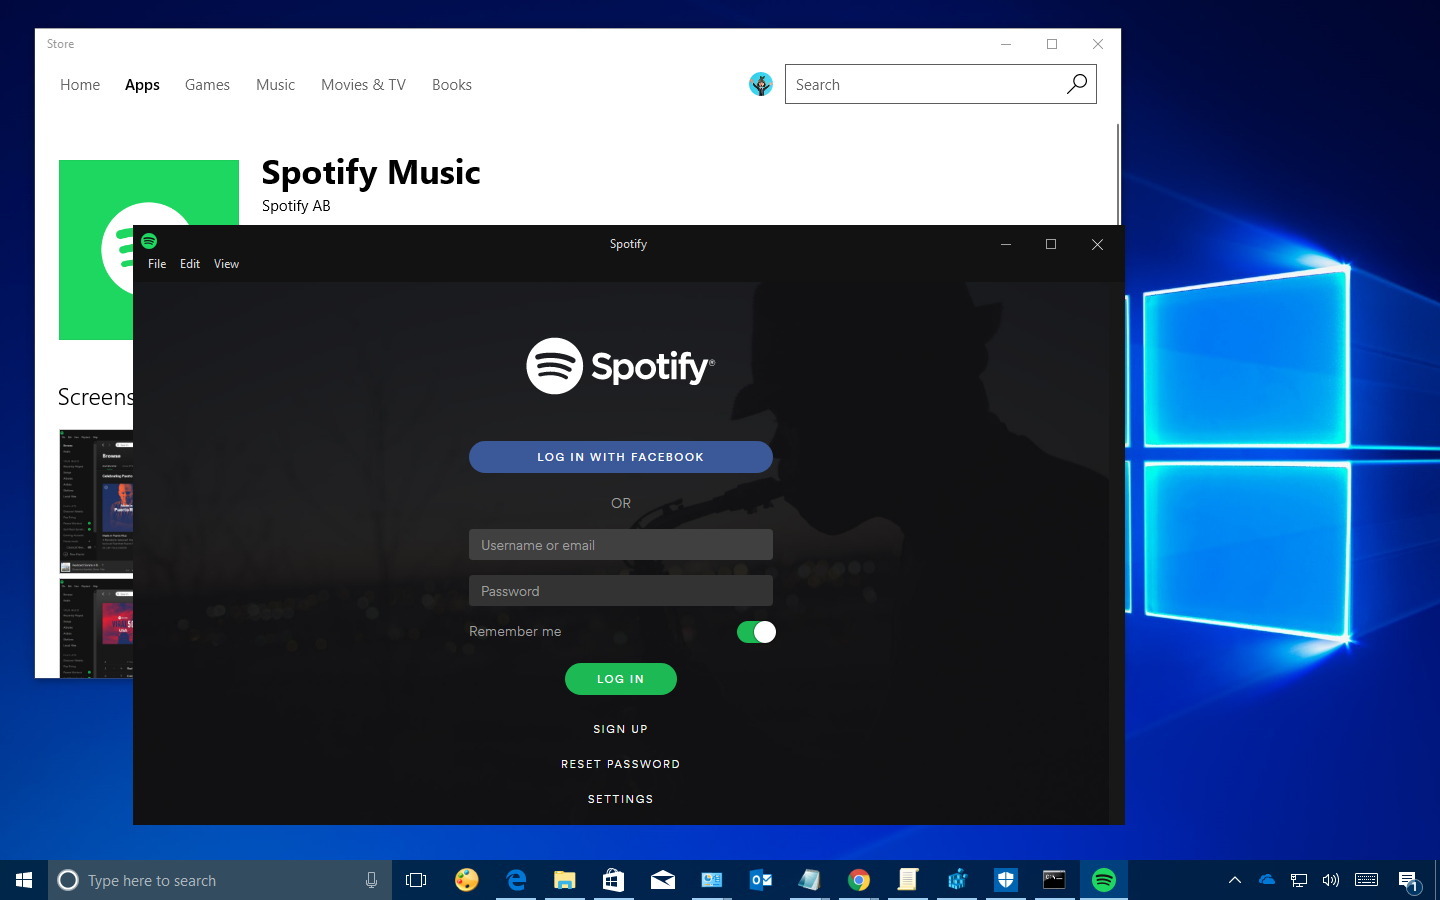 How to Stop Spotify From Opening on Startup